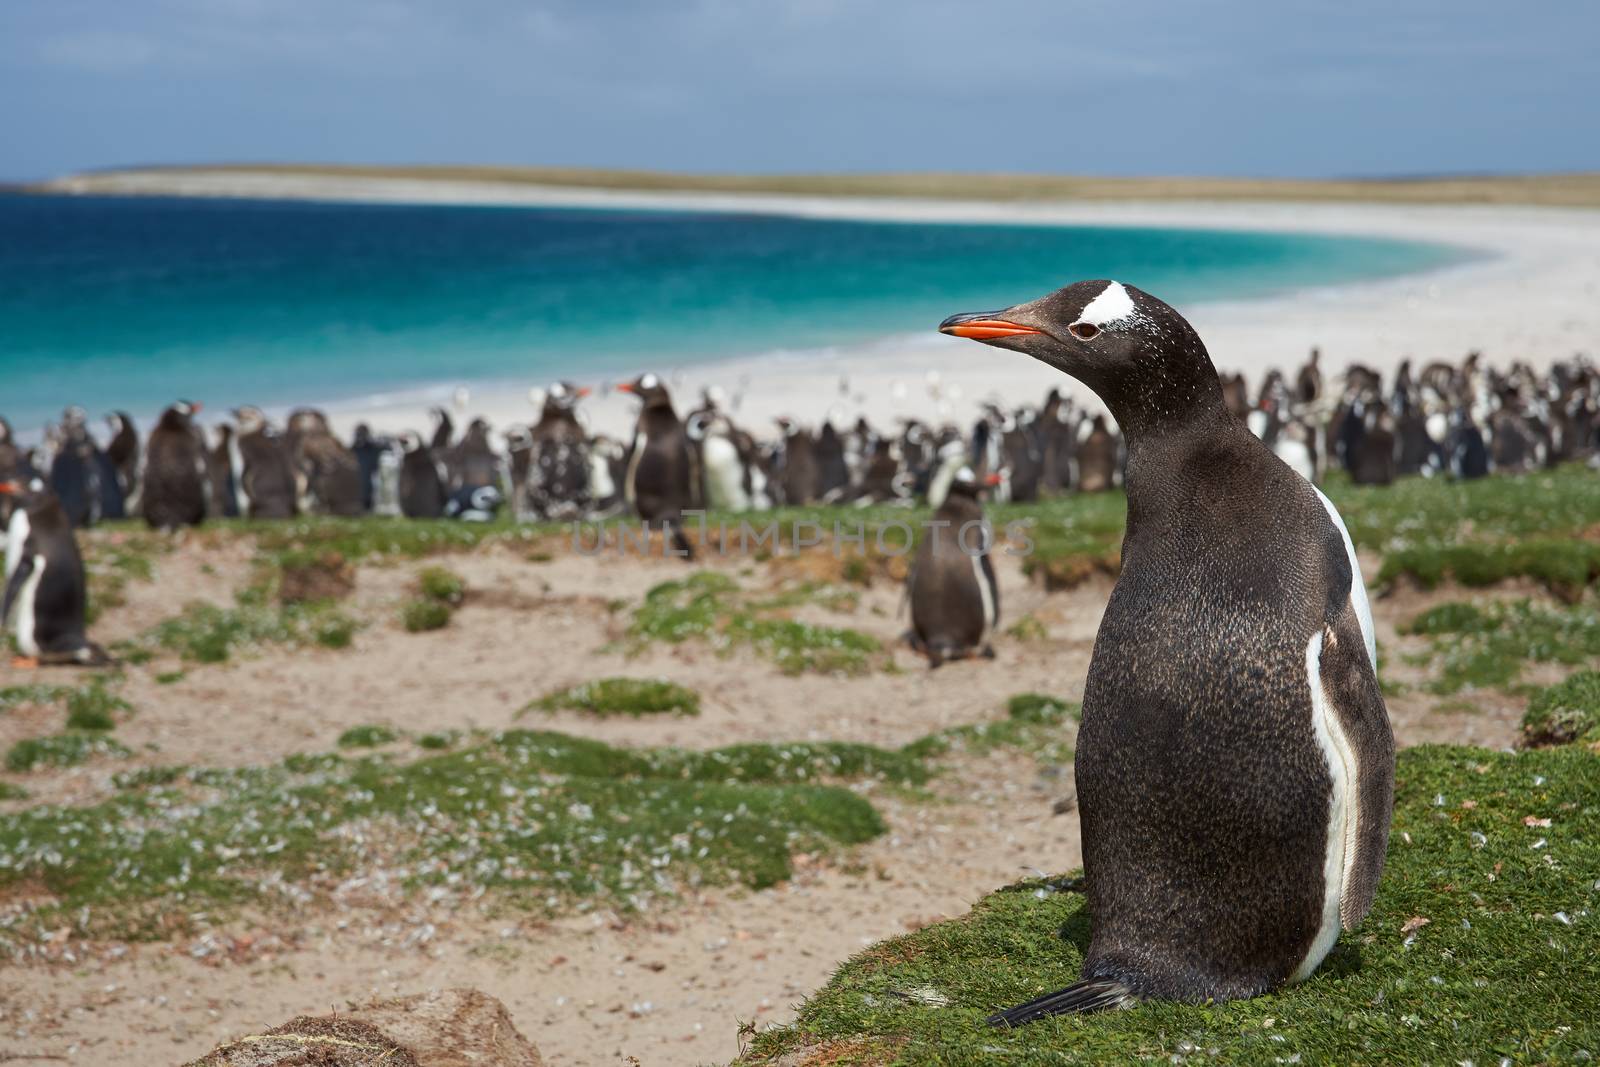 Gentoo Penguin (Pygoscelis papua) on Bleaker Island in the Falkland Islands. Thousands of Gentoo Penguins and Magellanic Penguins (Spheniscus magellanicus) crowd the beach in the background.